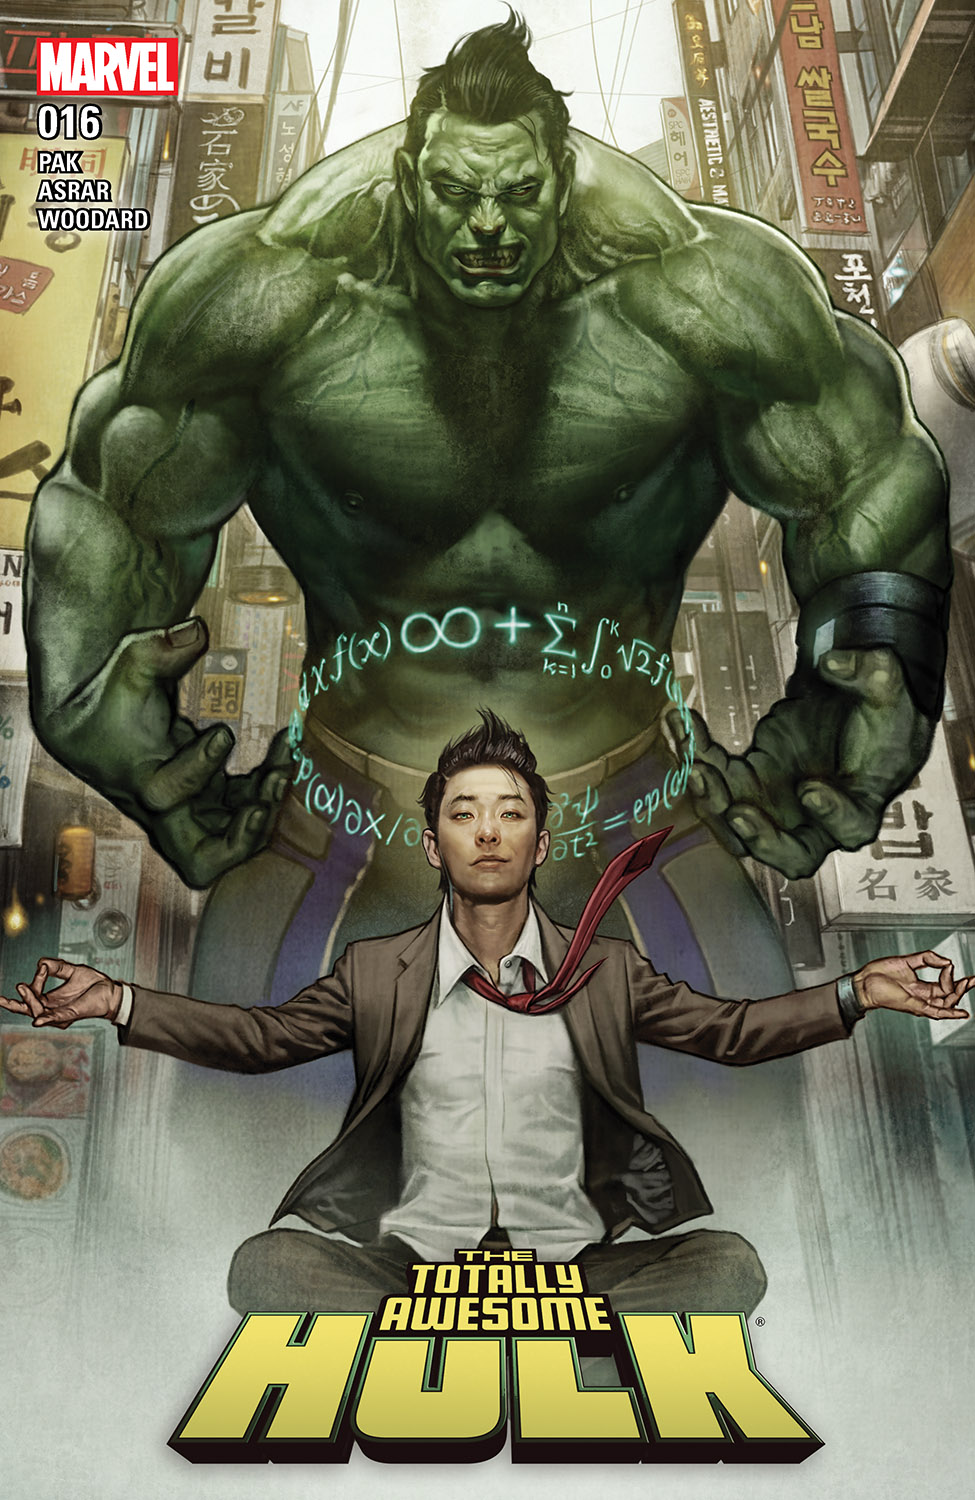 The Totally Awesome Hulk (2015) #16